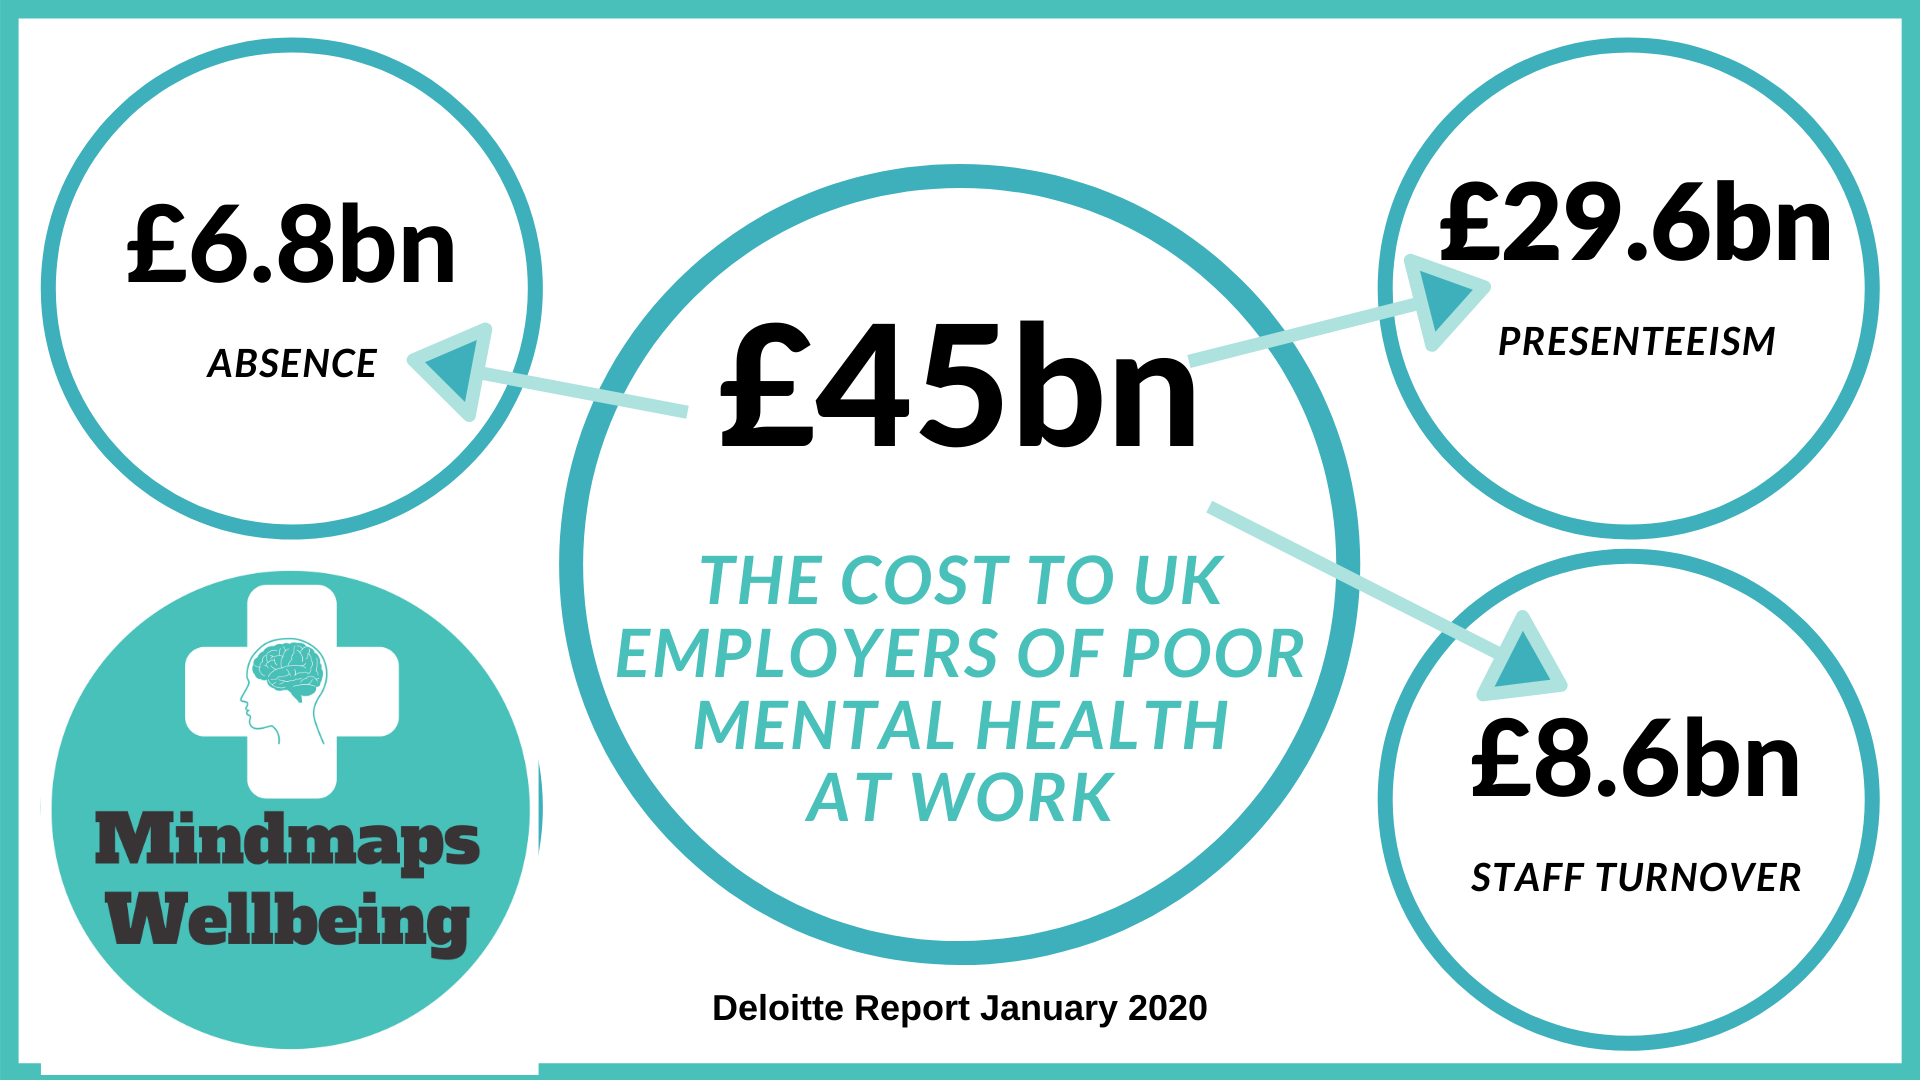 The cost of poor mental health at work costs UK employers an estimated £45 billion, of which £29.6bn is presenteeism, £8.6bn staff turnover and £6.8bn absence from the Deloitte report Jan 2020